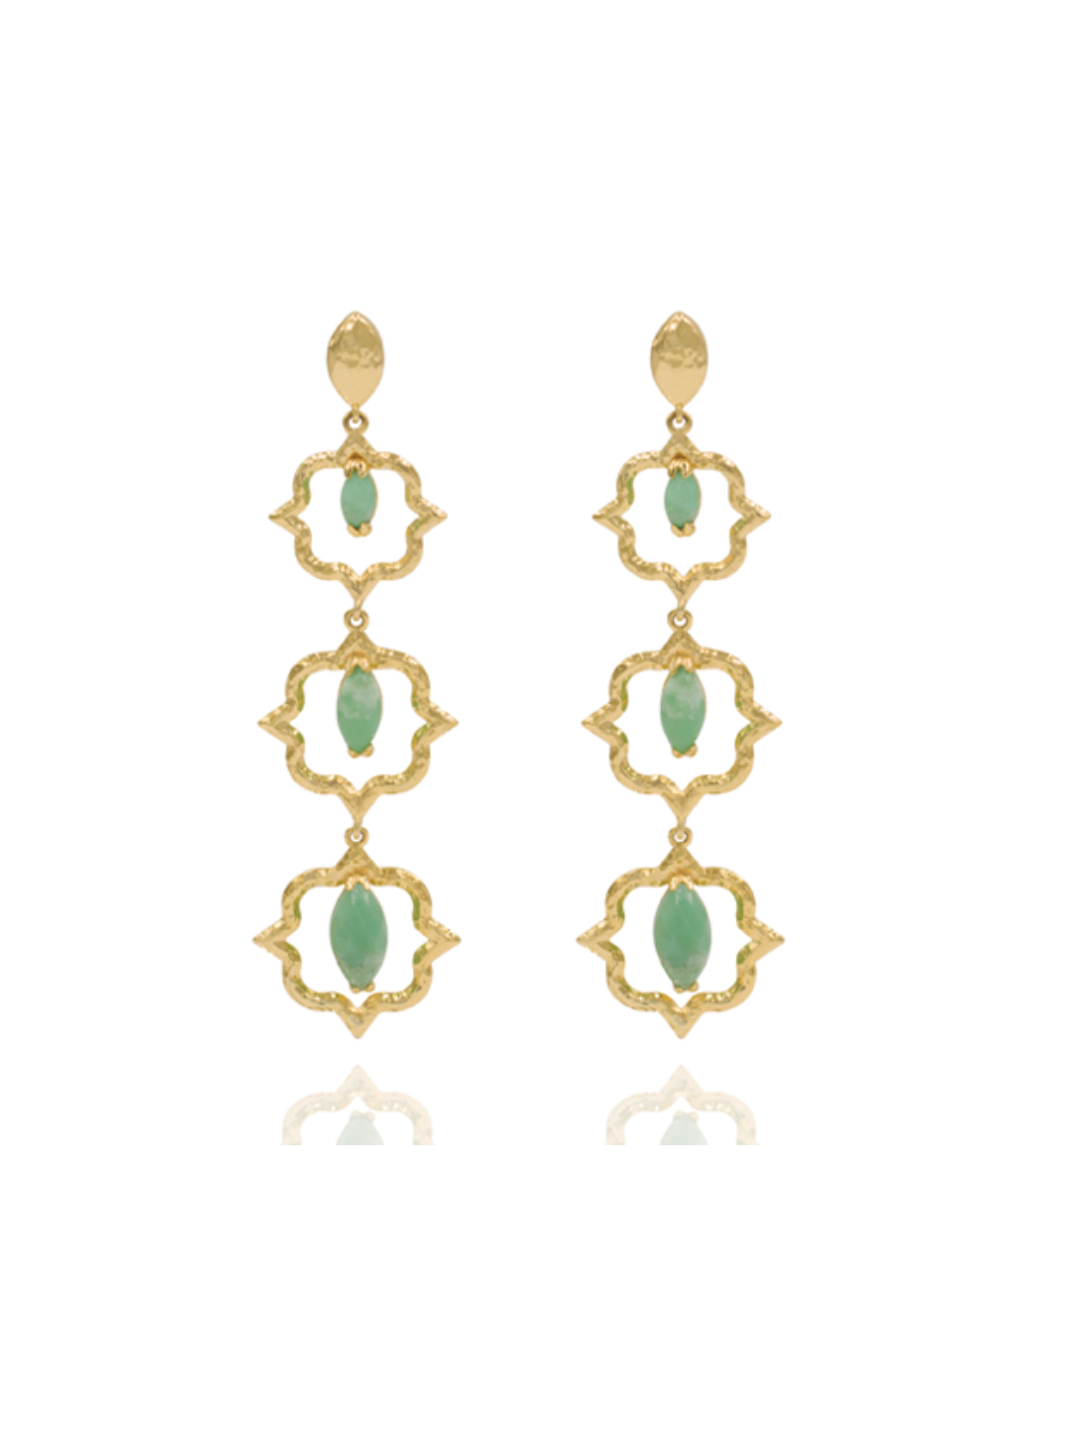 Capturing India’s beautiful architecture & our love for nature our Chrysoprase cocktail earrings will take you on an adventurous journey. An irreplaceable pair starring the semi precious stone Chrysoprase with vermeil gold to enhance any outfit.